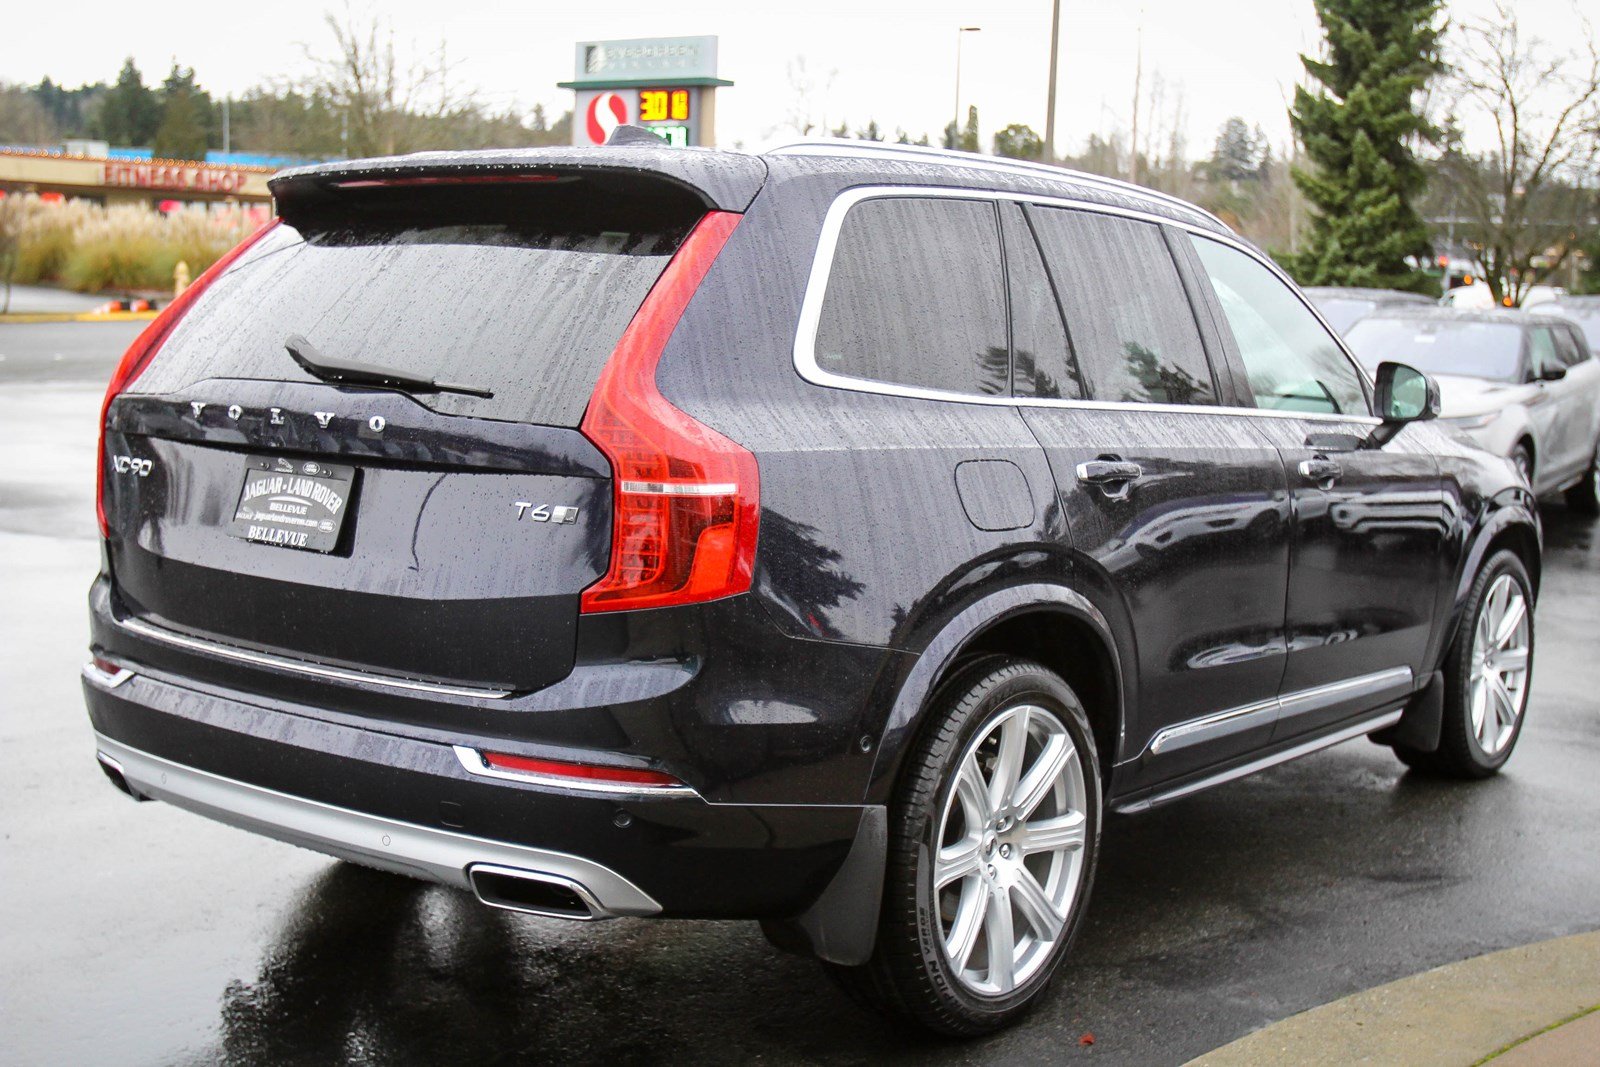 PreOwned 2017 Volvo XC90 Inscription Sport Utility in Bellevue 8933 Land Rover Bellevue